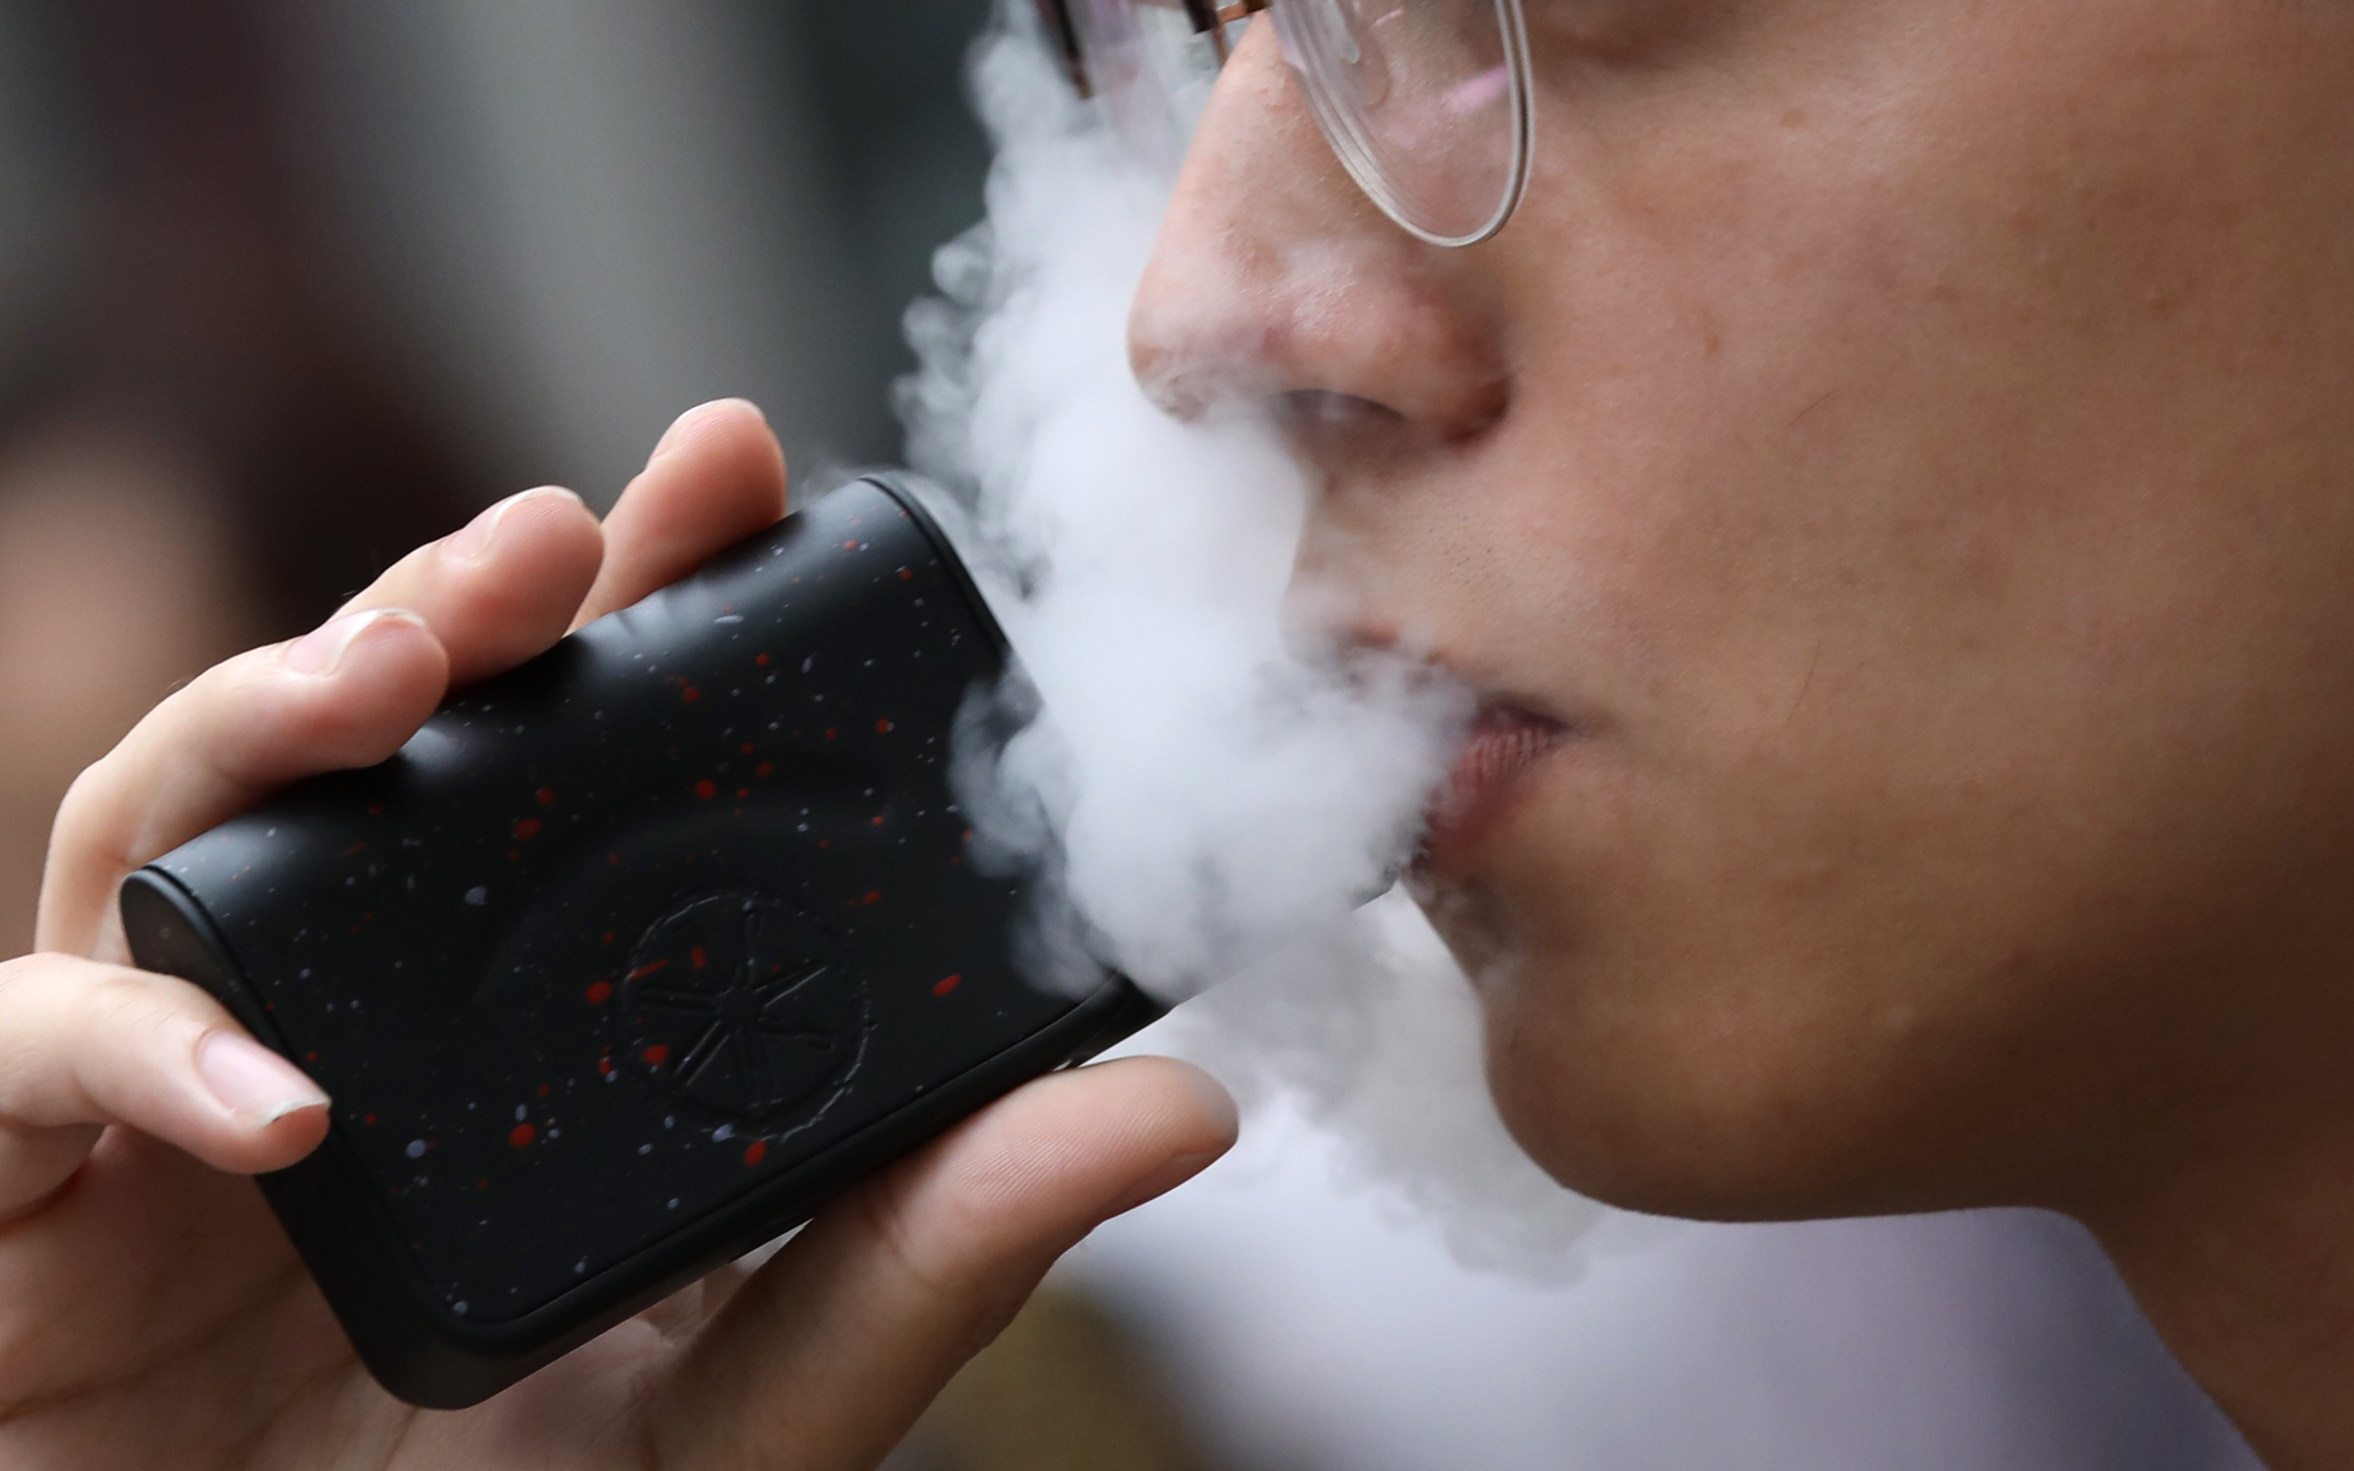 A law banning the sale of e-cigarettes came into effect on Saturday. Photo: Nora Tam